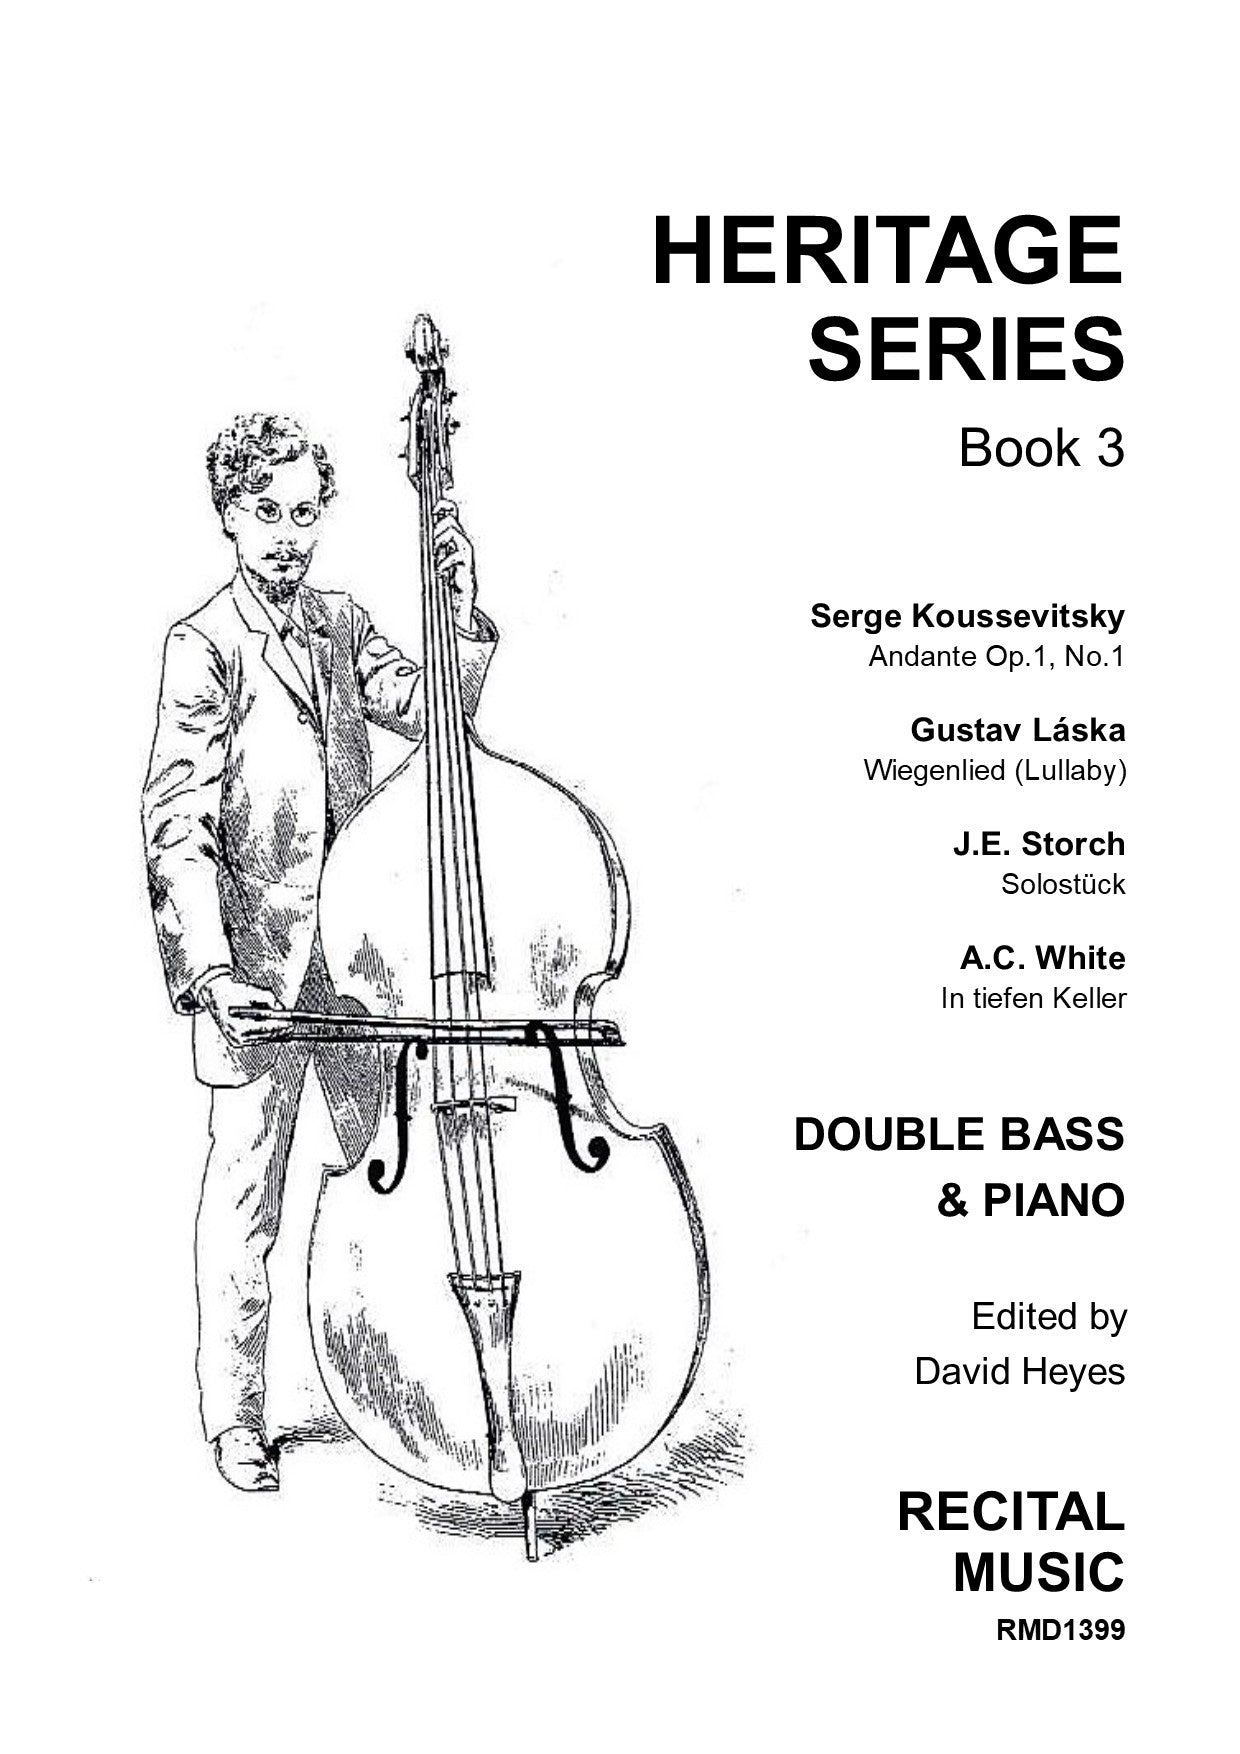 Heritage Series Book 3 for double bass & piano (ed. David Heyes)